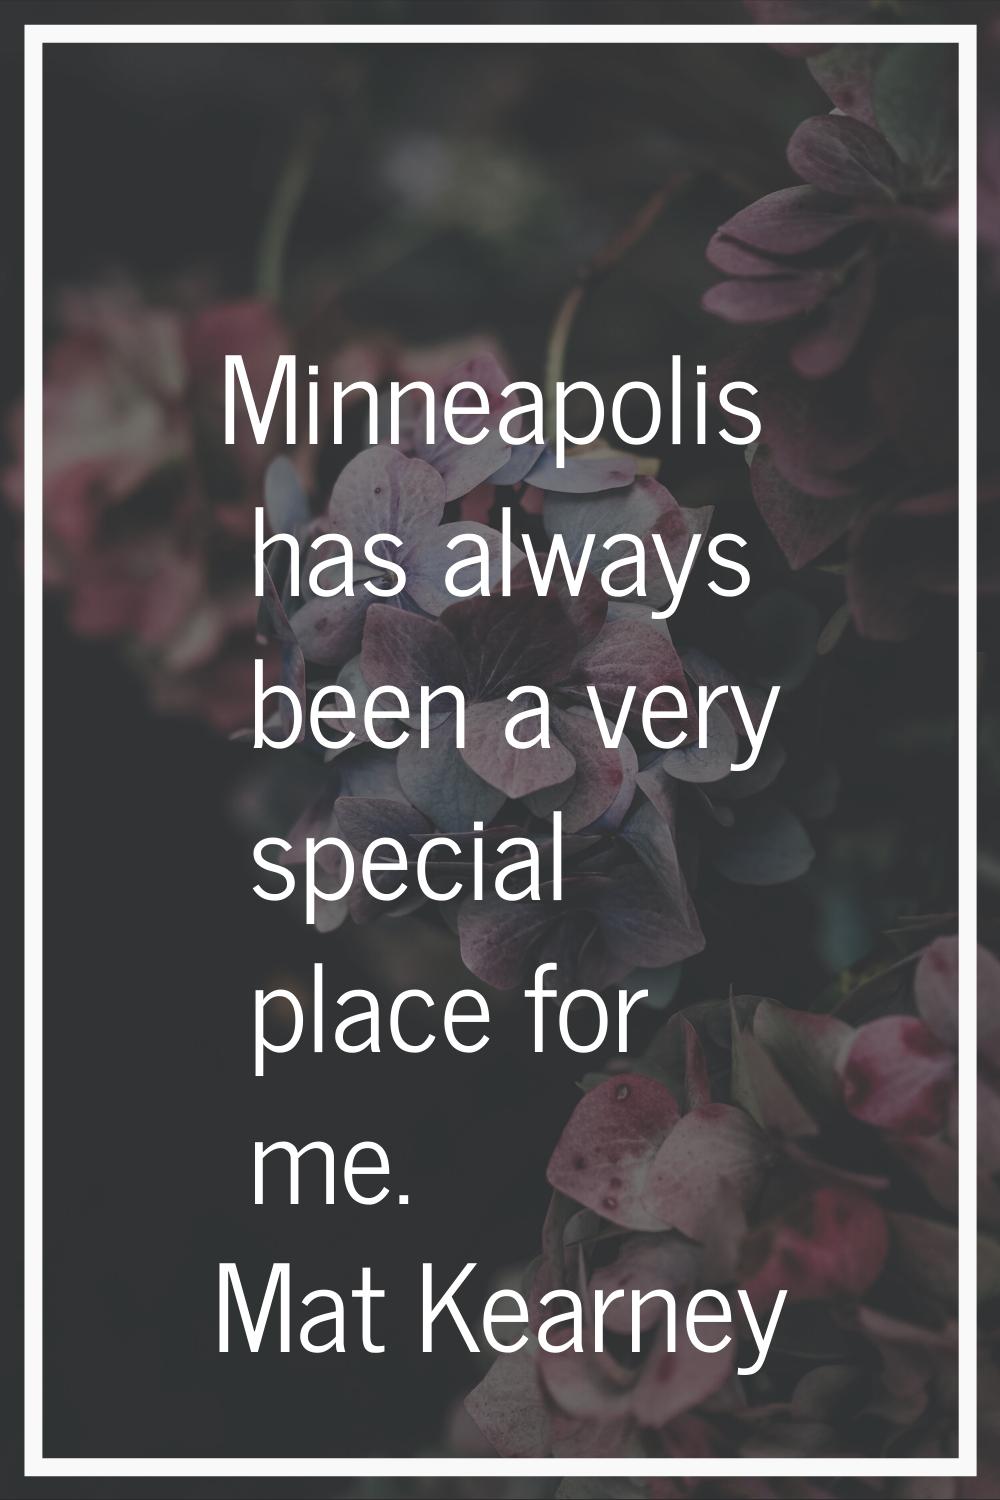 Minneapolis has always been a very special place for me.